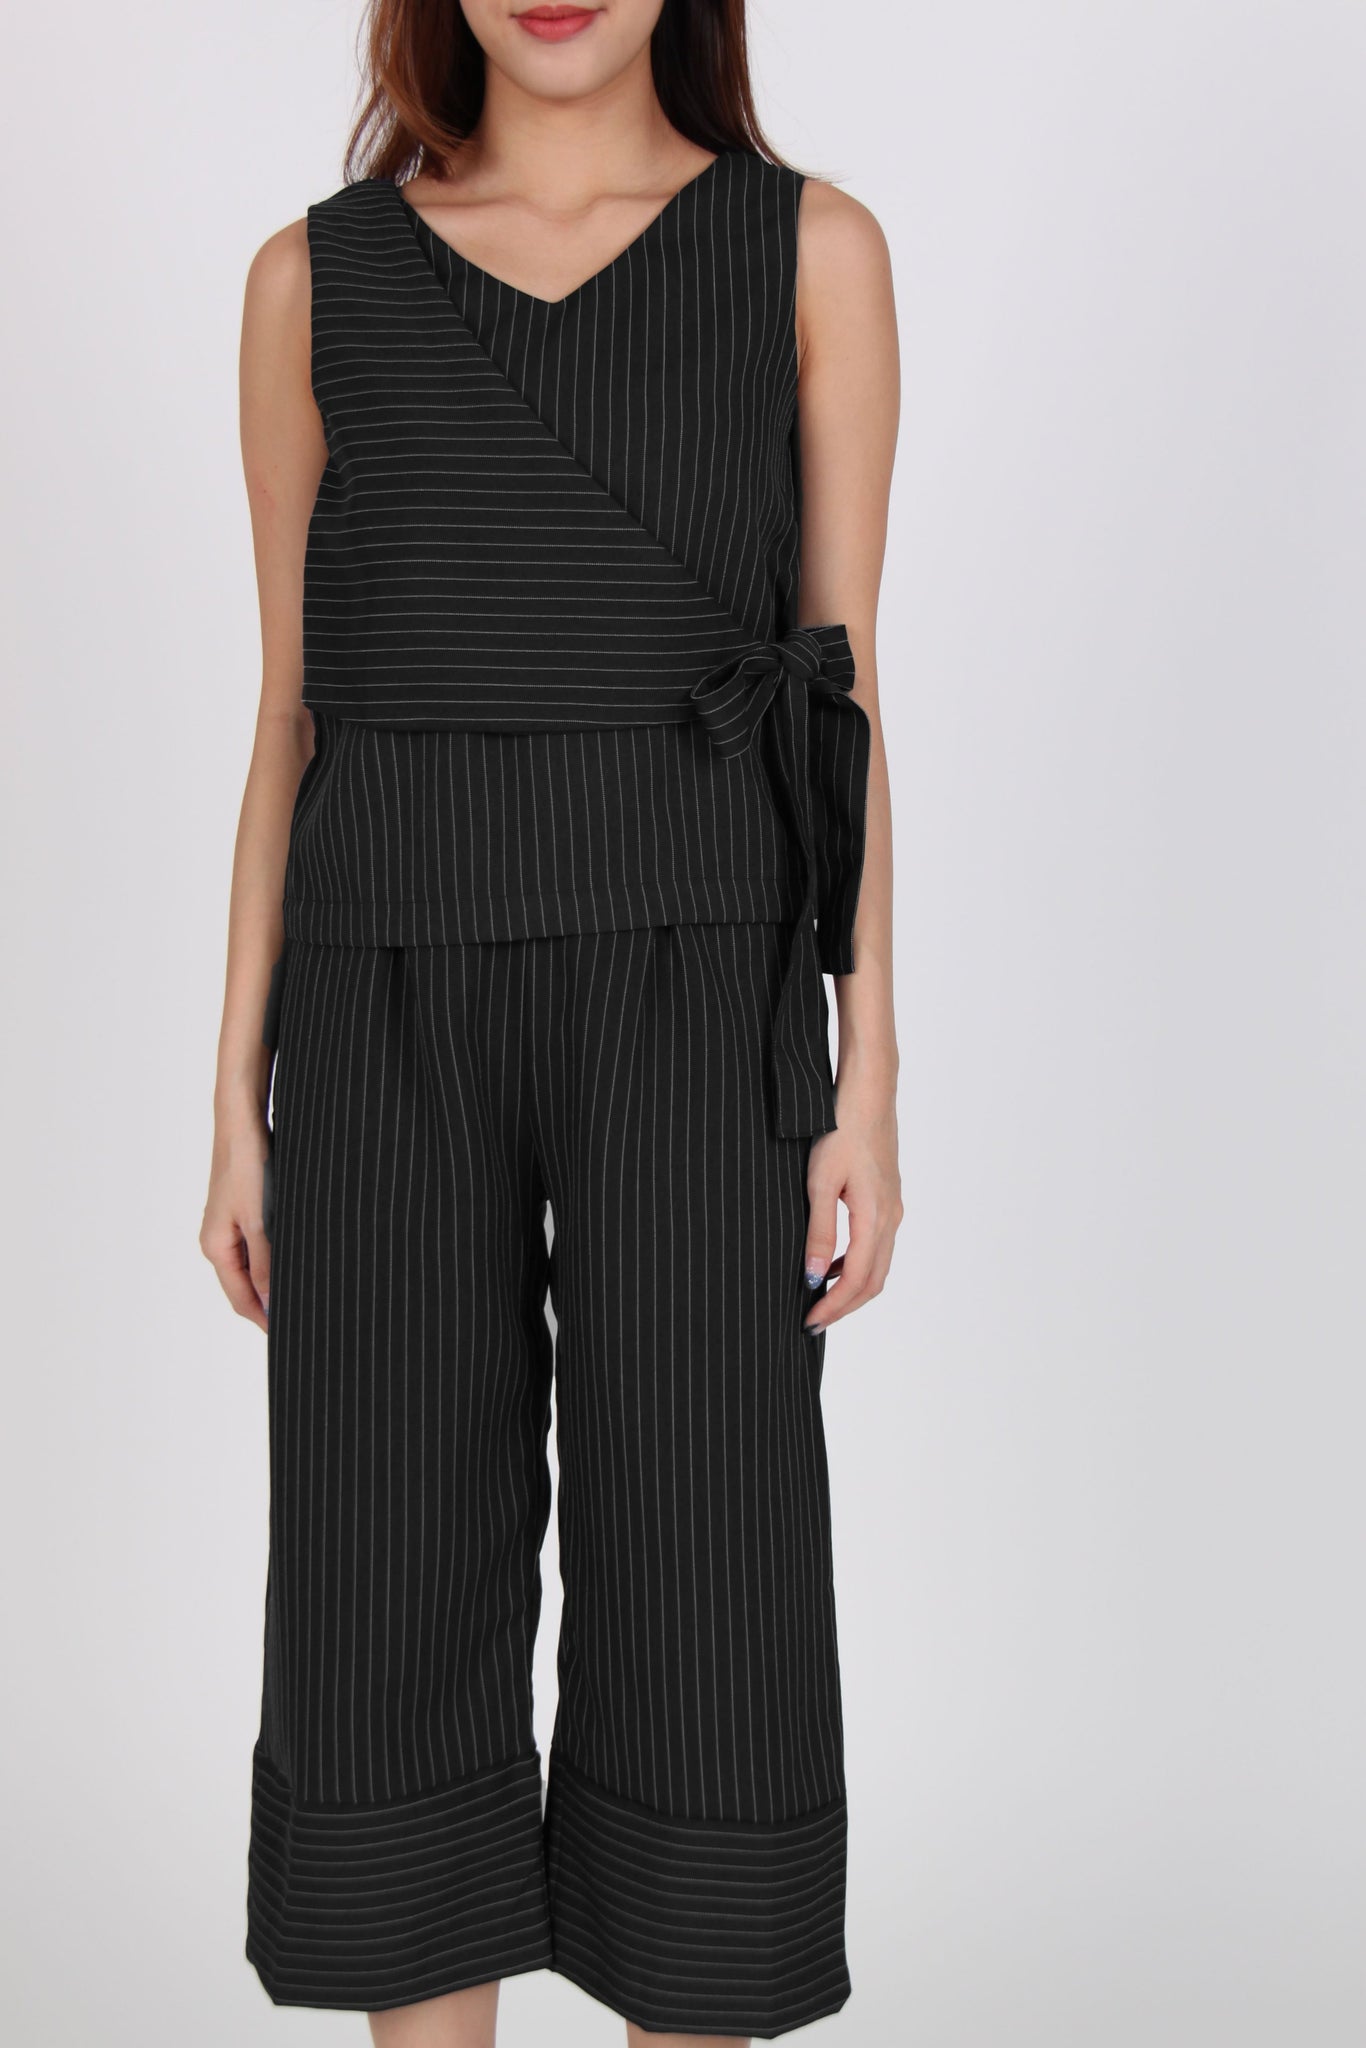 2 Piece Pinstripe Side Overlap Top with Culottes in Black